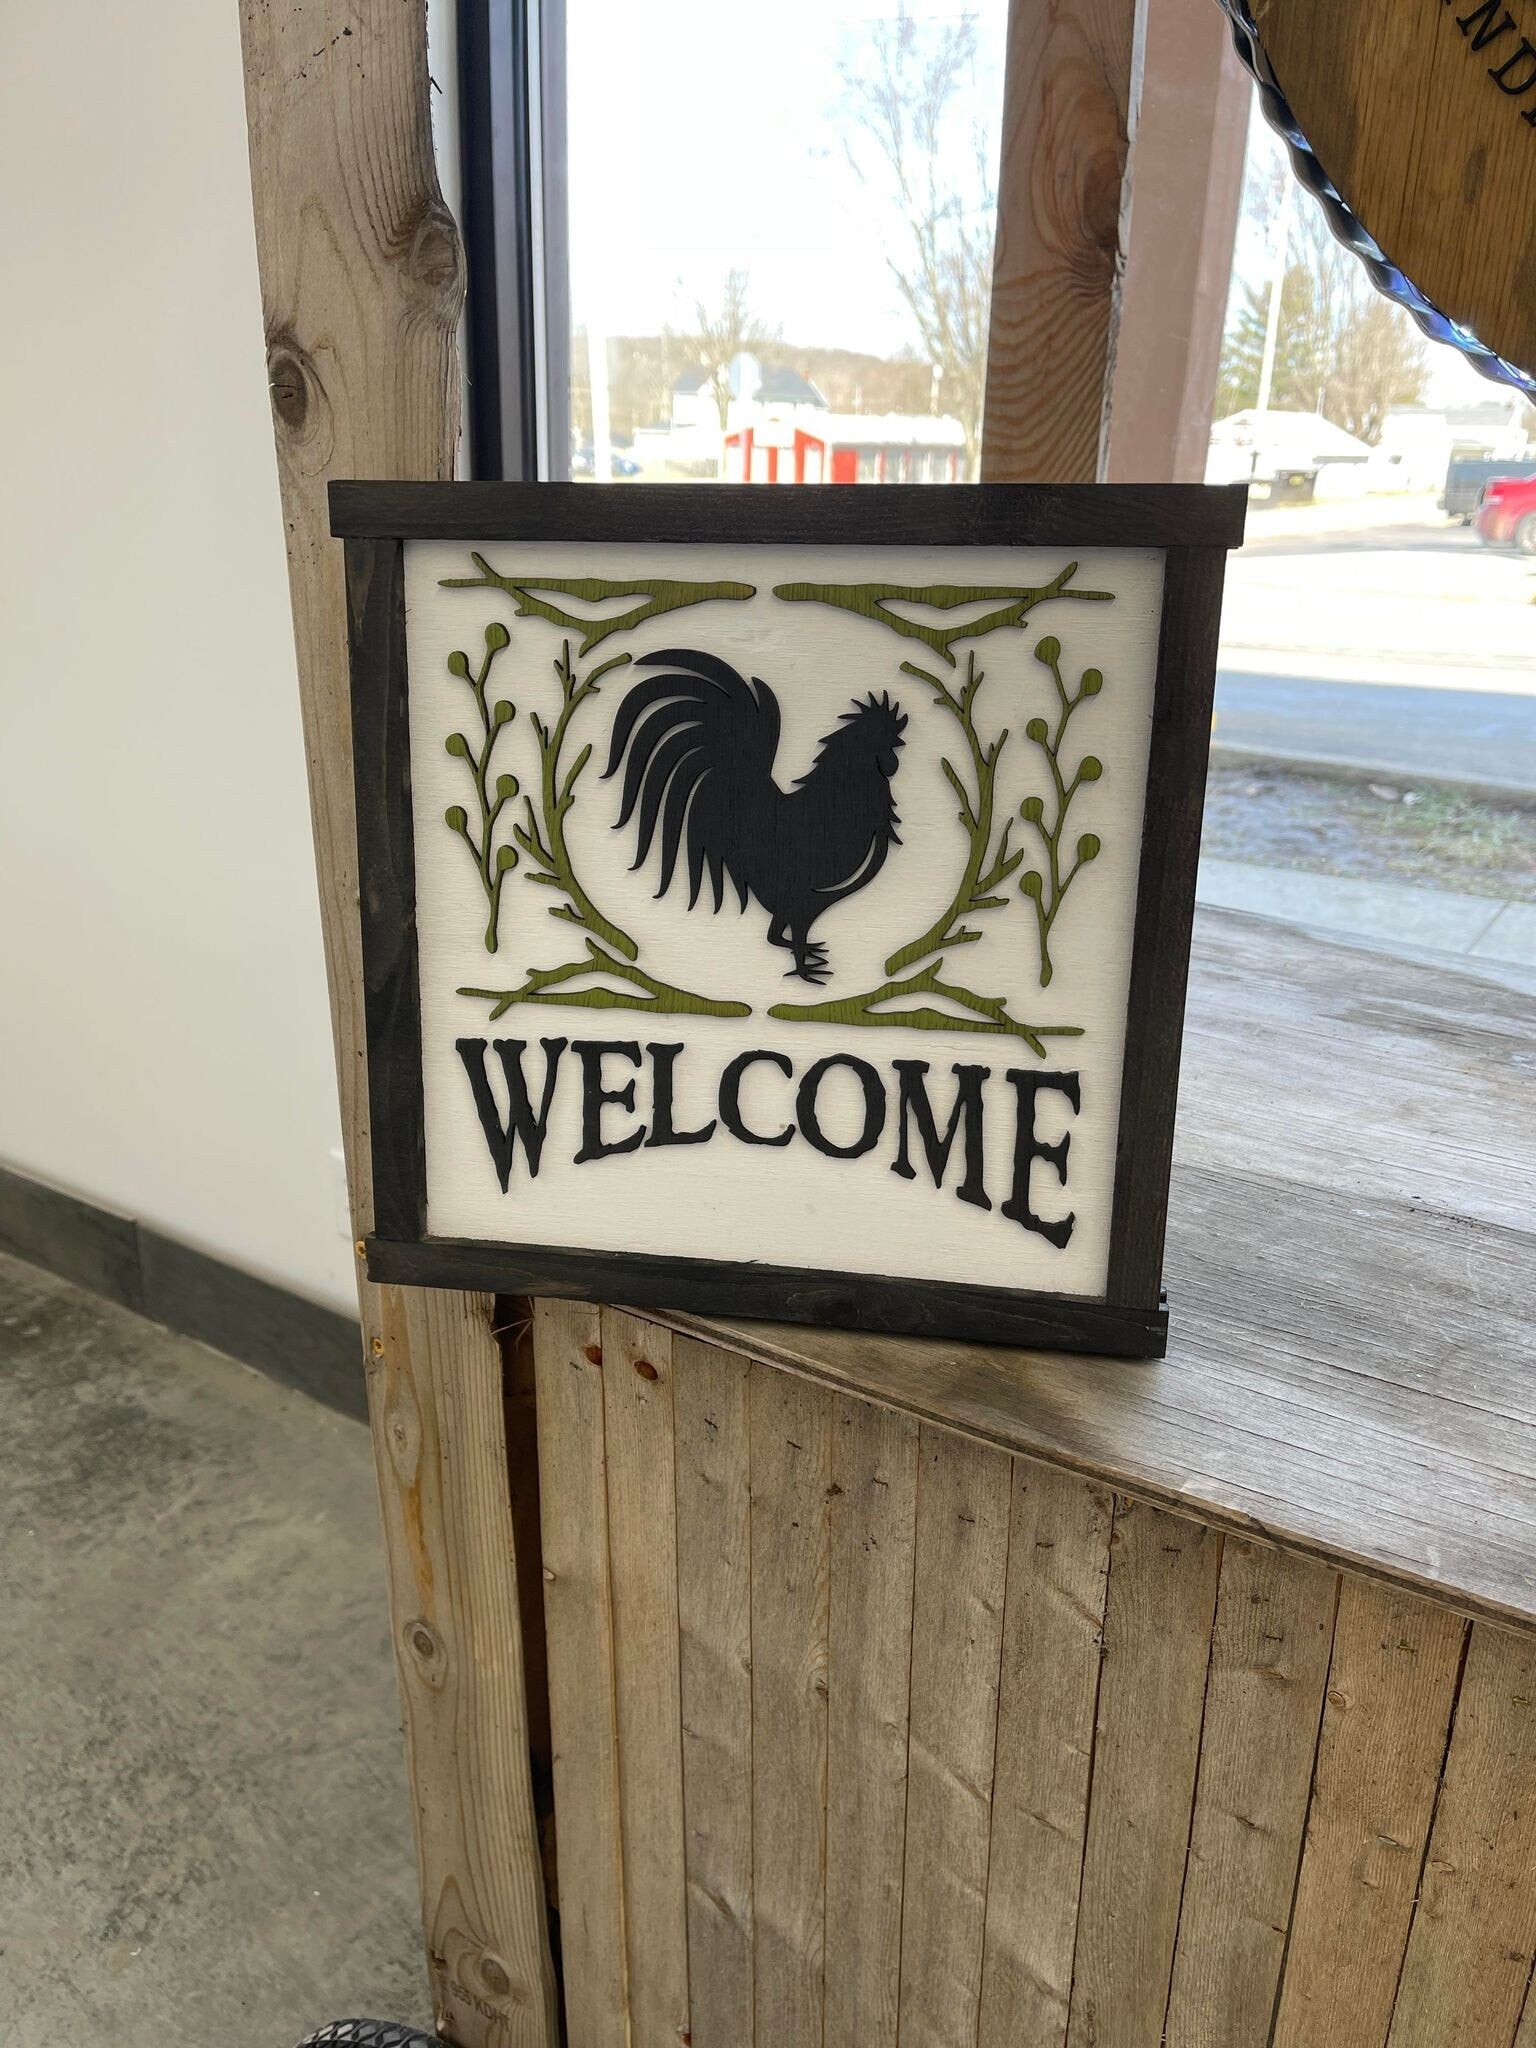 Farmhouse Welcome Rustic Rooster Chicken Coop Framed Wall Decor Handmade 3D Raised Text Farm Eggs Kitchen Decor Mudroom Entryway Welcoming